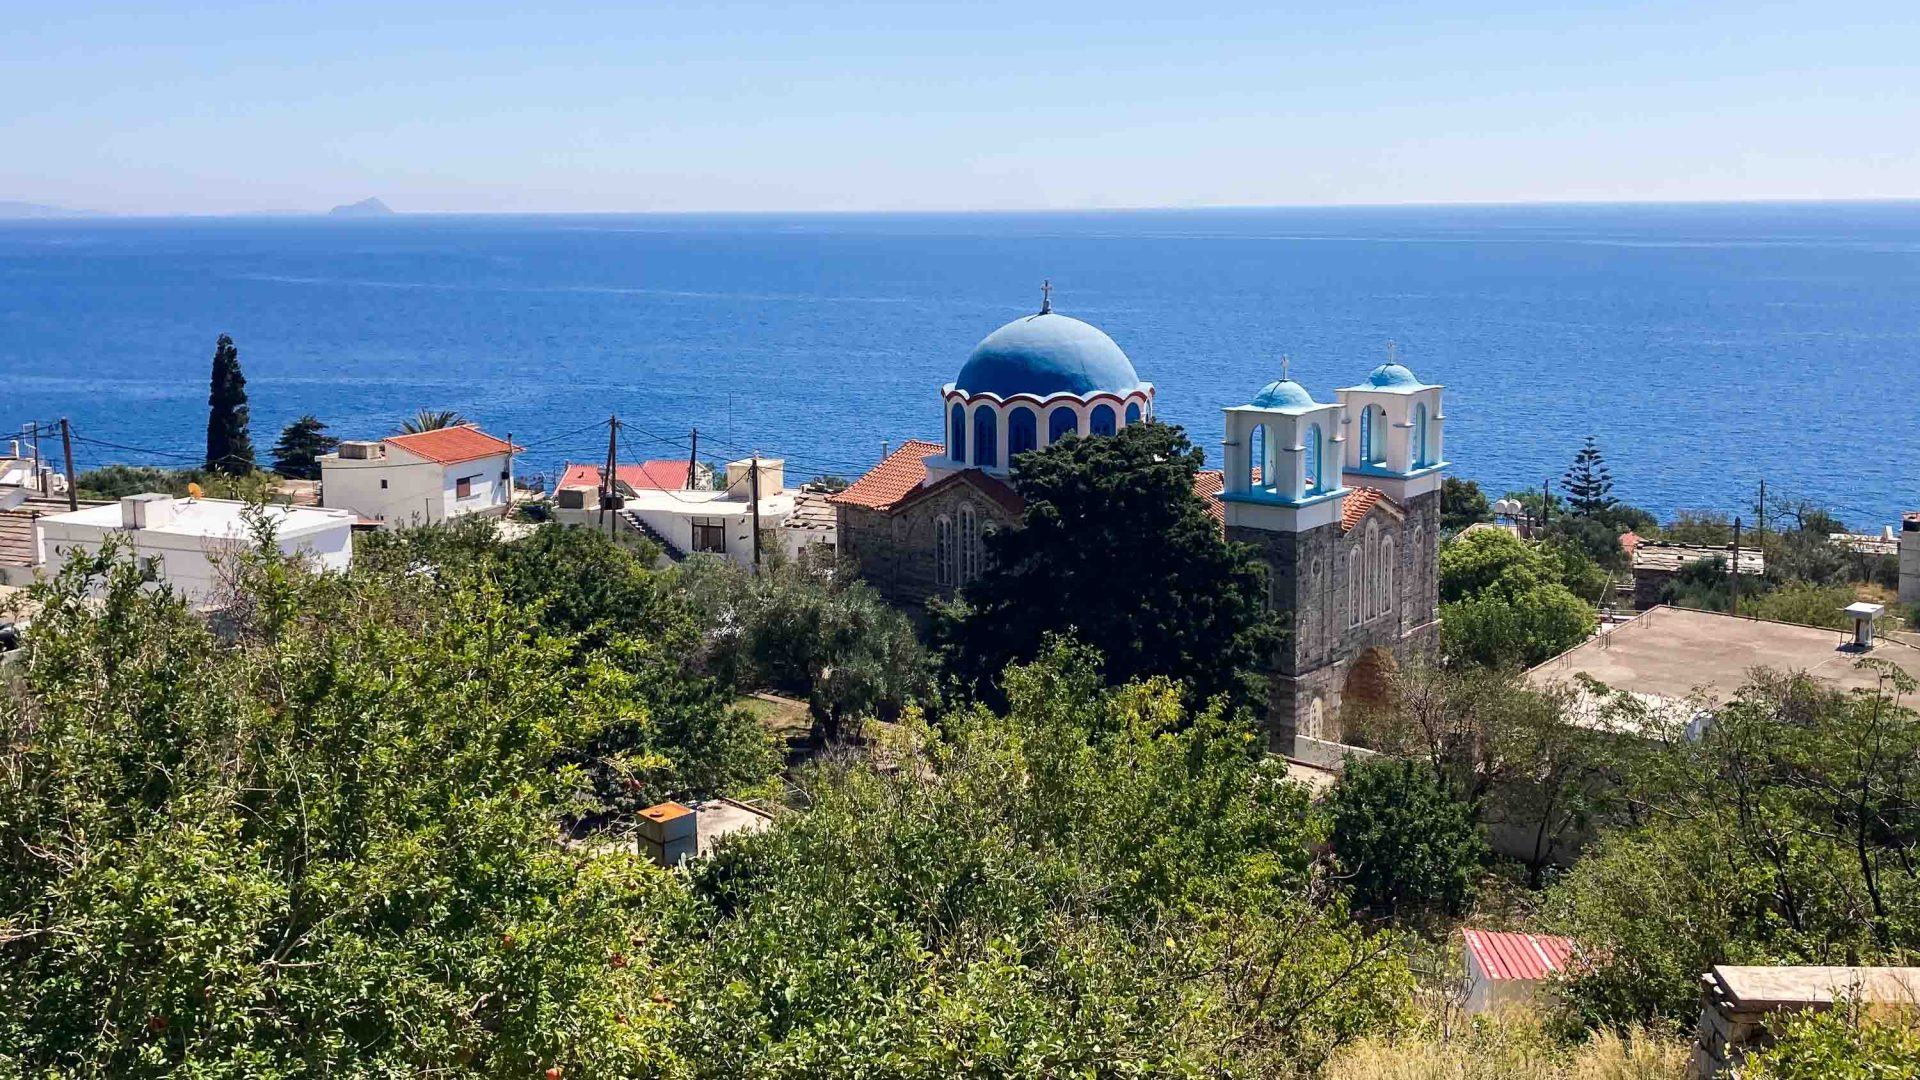 The blue dome of a church stands above other houses, backed by sea.